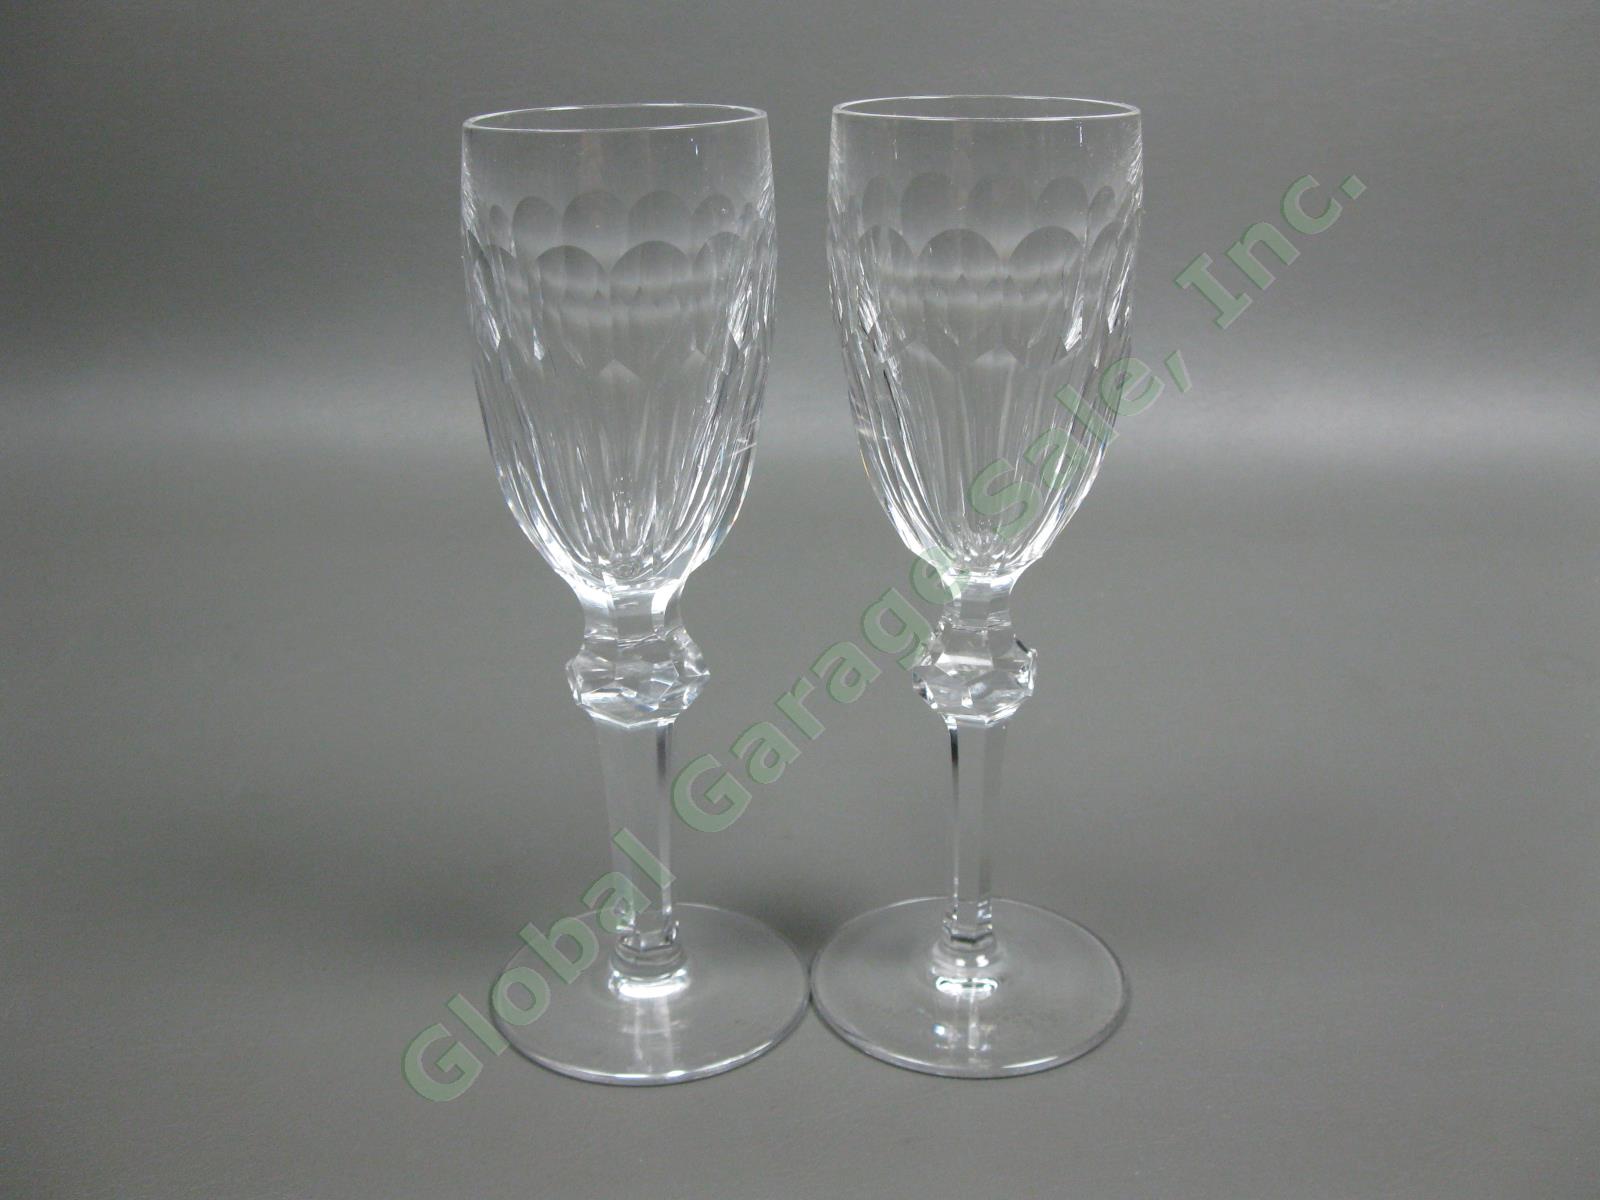 4 Waterford Crystal Curraghmore Sherry Wine Glasses Ireland Blown Cut Glass Set 3